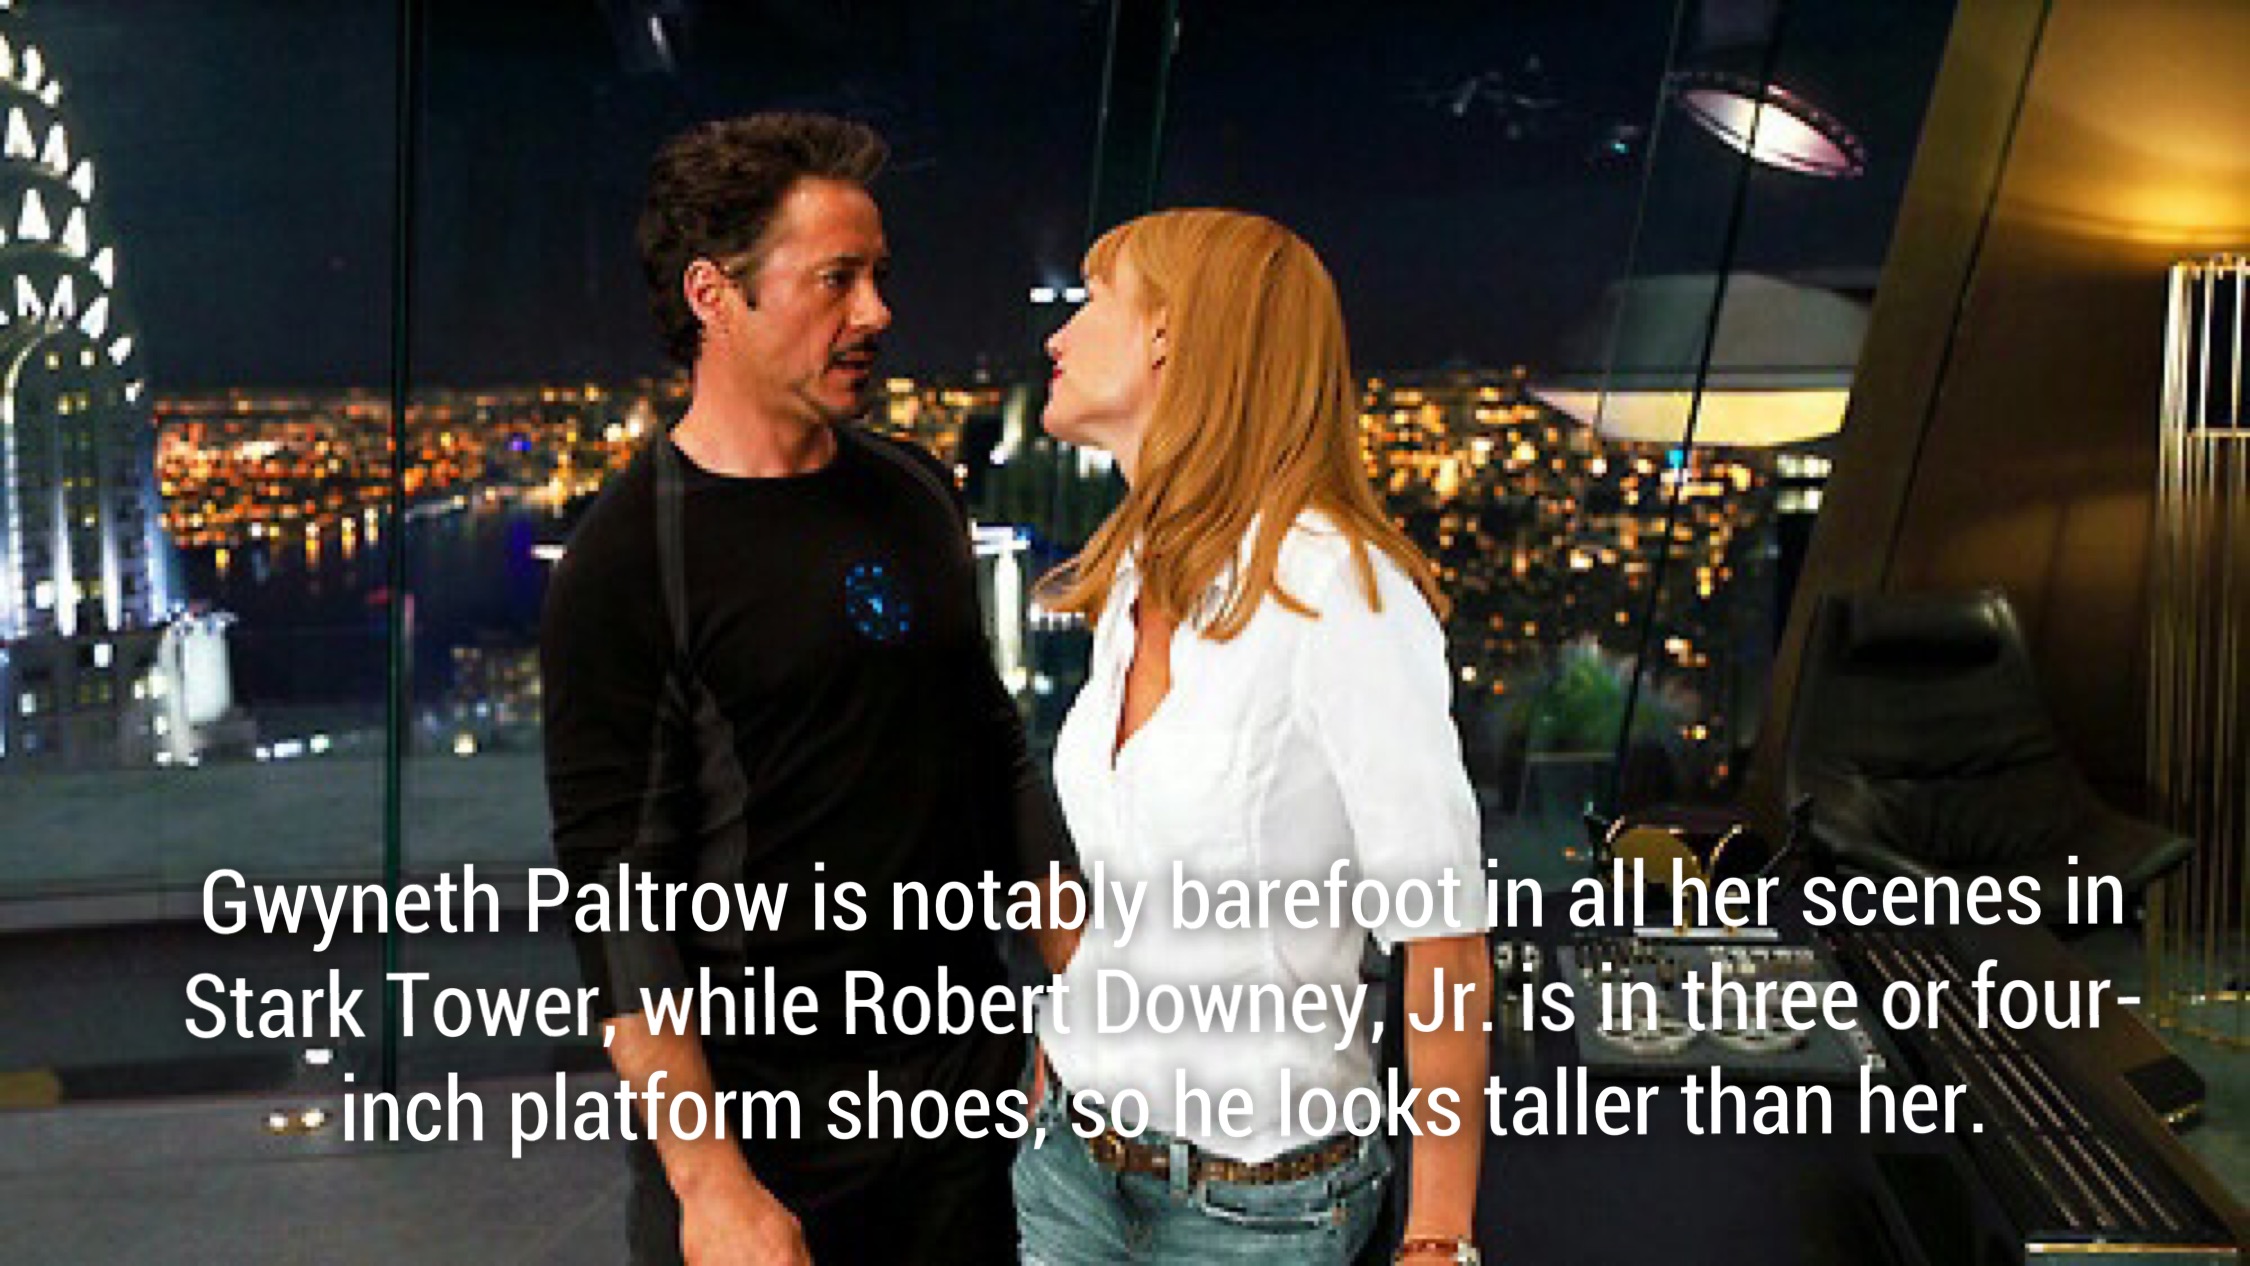 fun facts about the avengers - Gwyneth Paltrow is notably barefoot in all her scenes in Stark Tower, while Robert Downey, Jr. is in three or four . inch platform shoes so he looks taller than her.